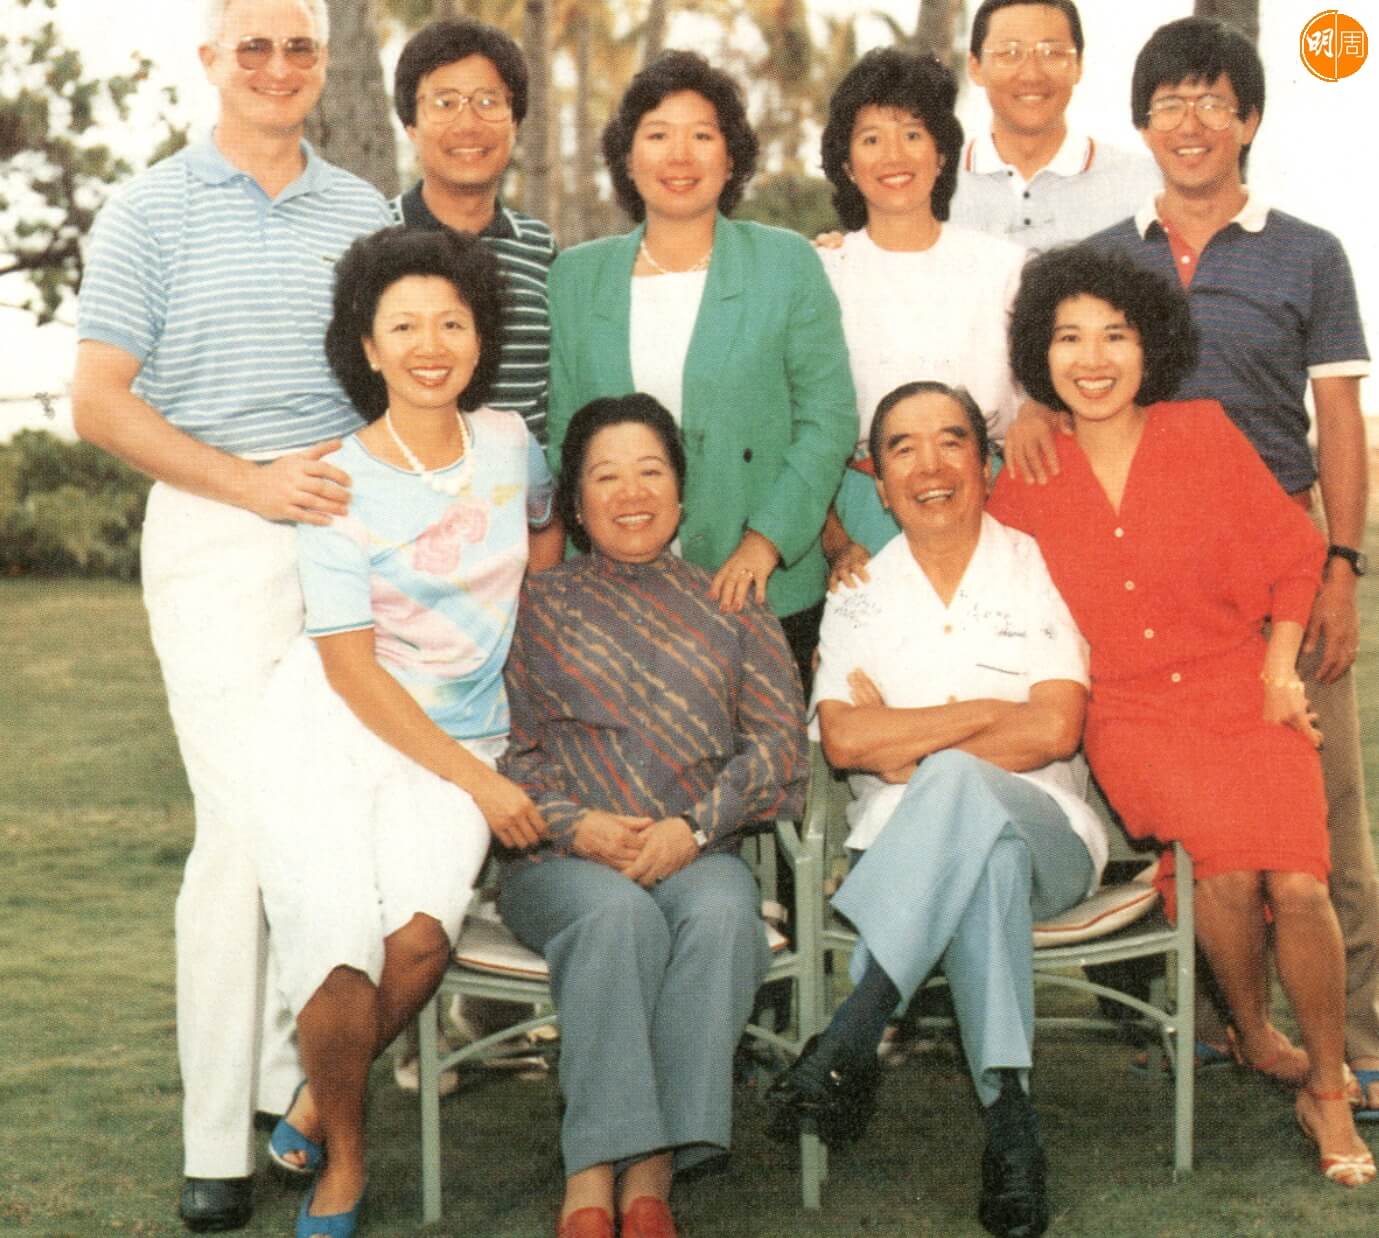 ¥]¥É­è Sir Yue-kong and Lady Pao are seen in this photograph taken in December 1983, with their four daughters and sons-in-law, Dr and Mrs. Helmut Sohmen, Dr and Mrs. Edga cheng, Mr. and Mrs Peter Woo (§d¥ú¥¿), and Mr and Mrs Shinichiro Watari. ¥]¥É­è ¥þ®aºÖ 12/1983